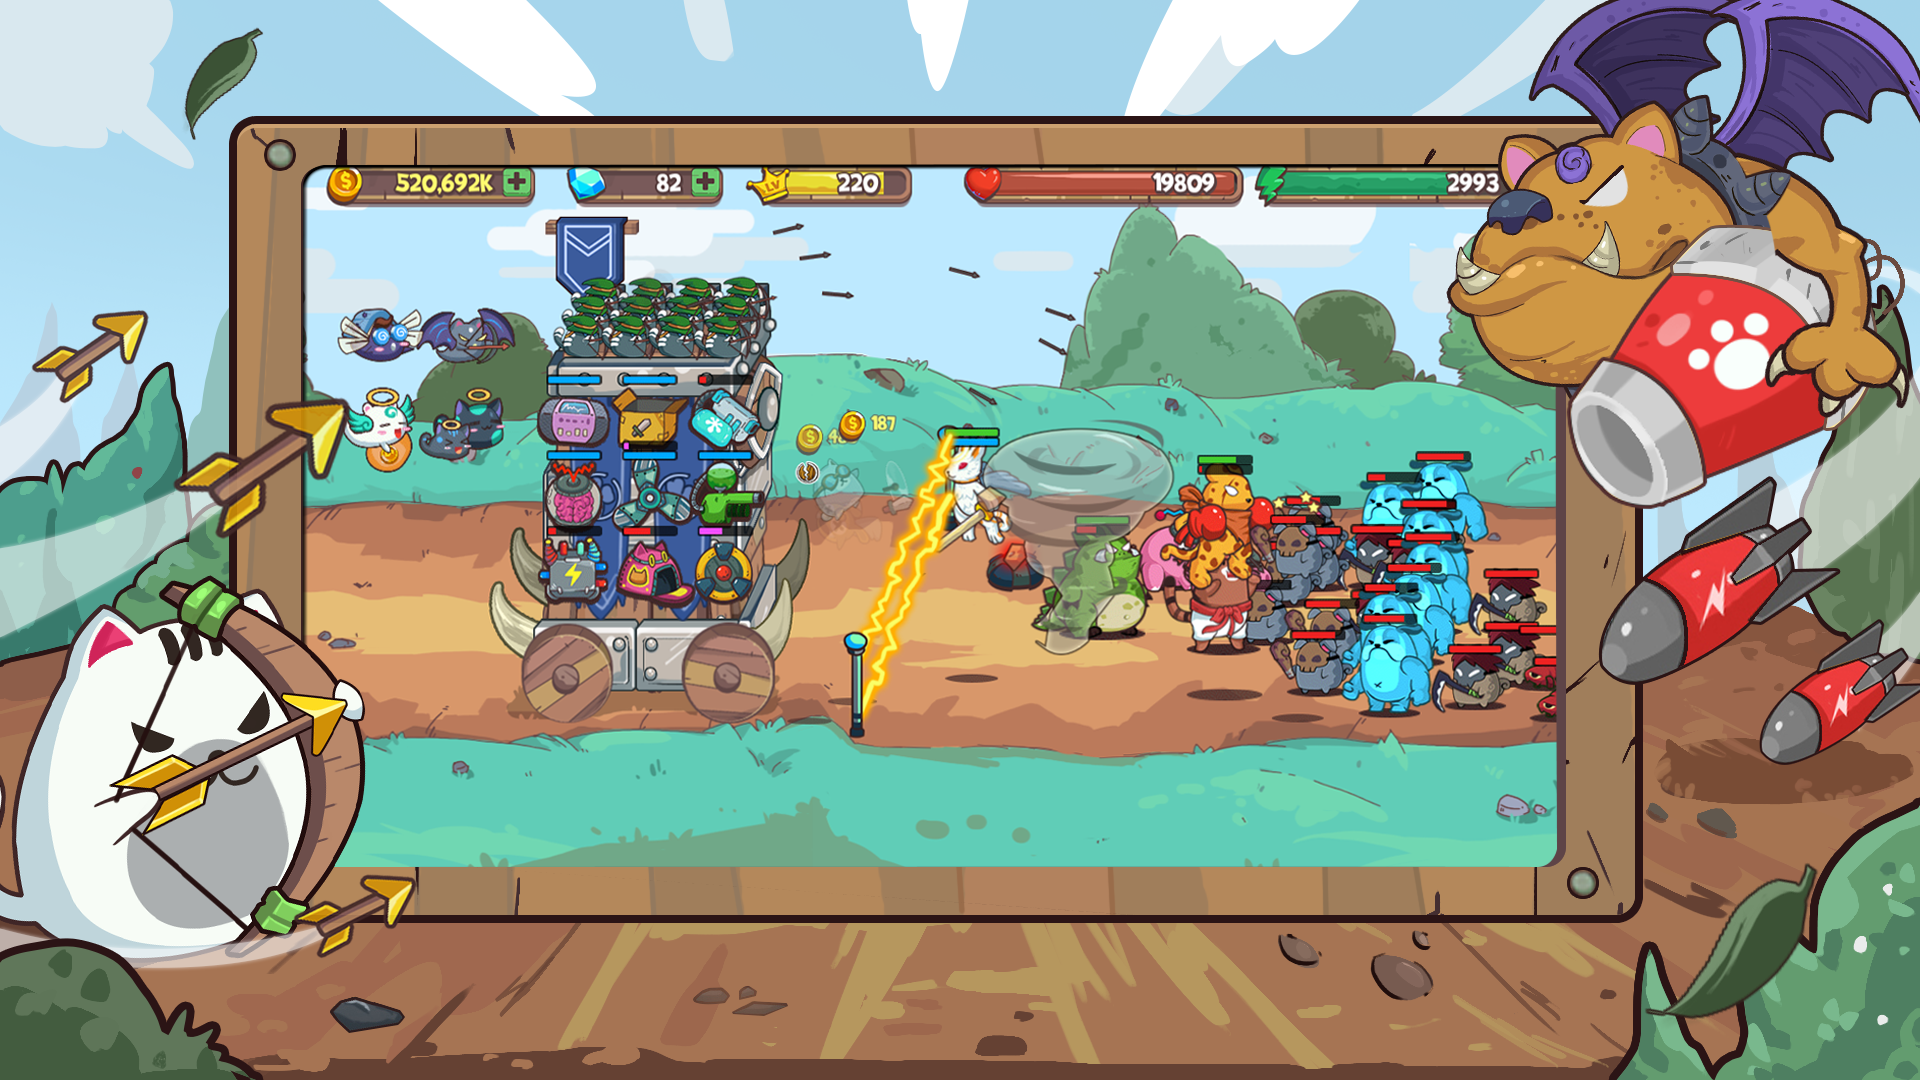 Screenshot 1 of CatTower Idle TD: Battle arena 4.1.2